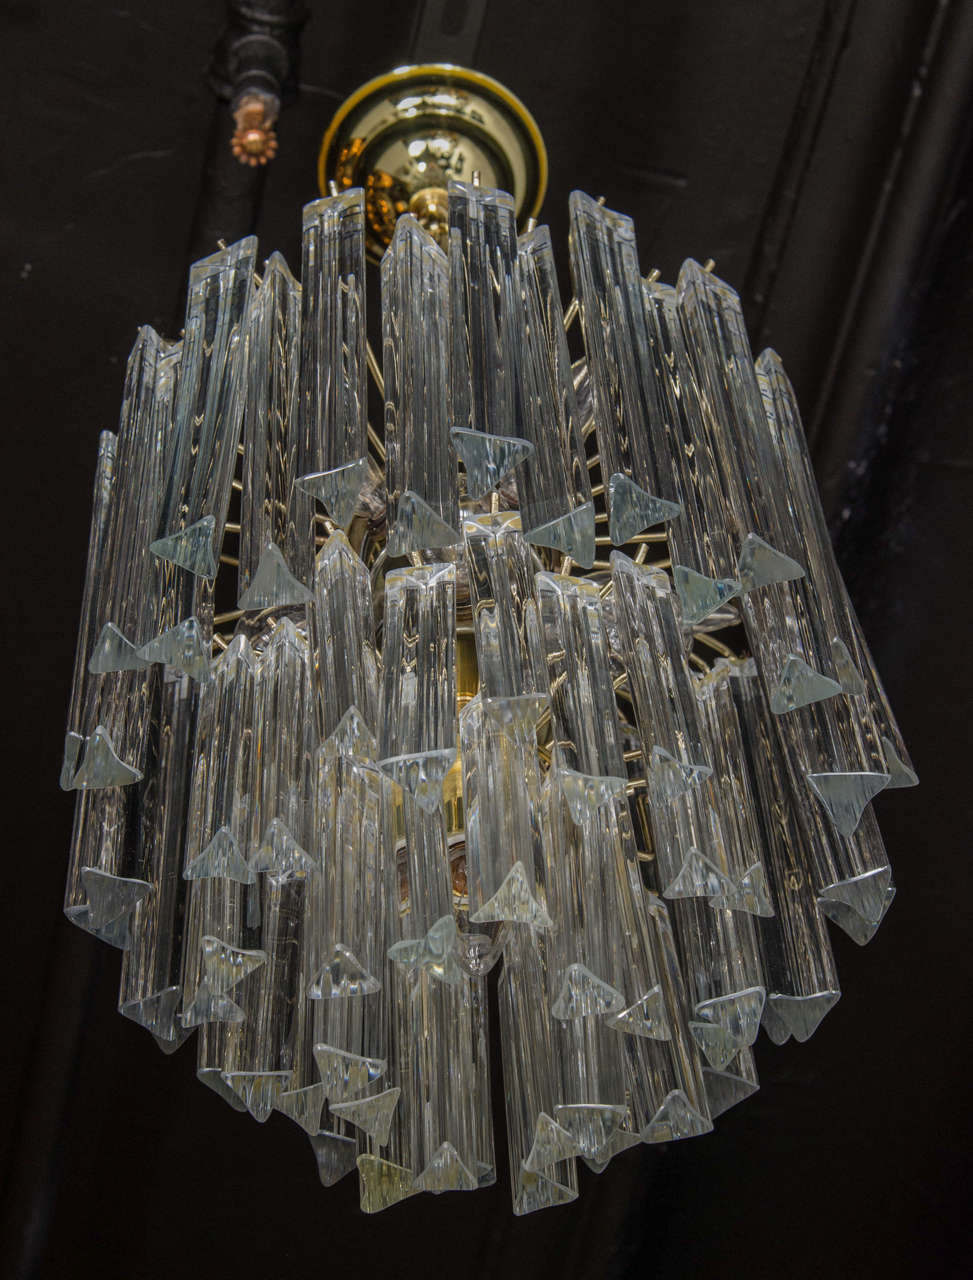 This exceptional Mid-Century Modernist Camer chandelier features individually handblown Murano glass triedre prisms that hang from its polished brass frame in a cascading effect. The high quality glass reflects the light beautifully for added